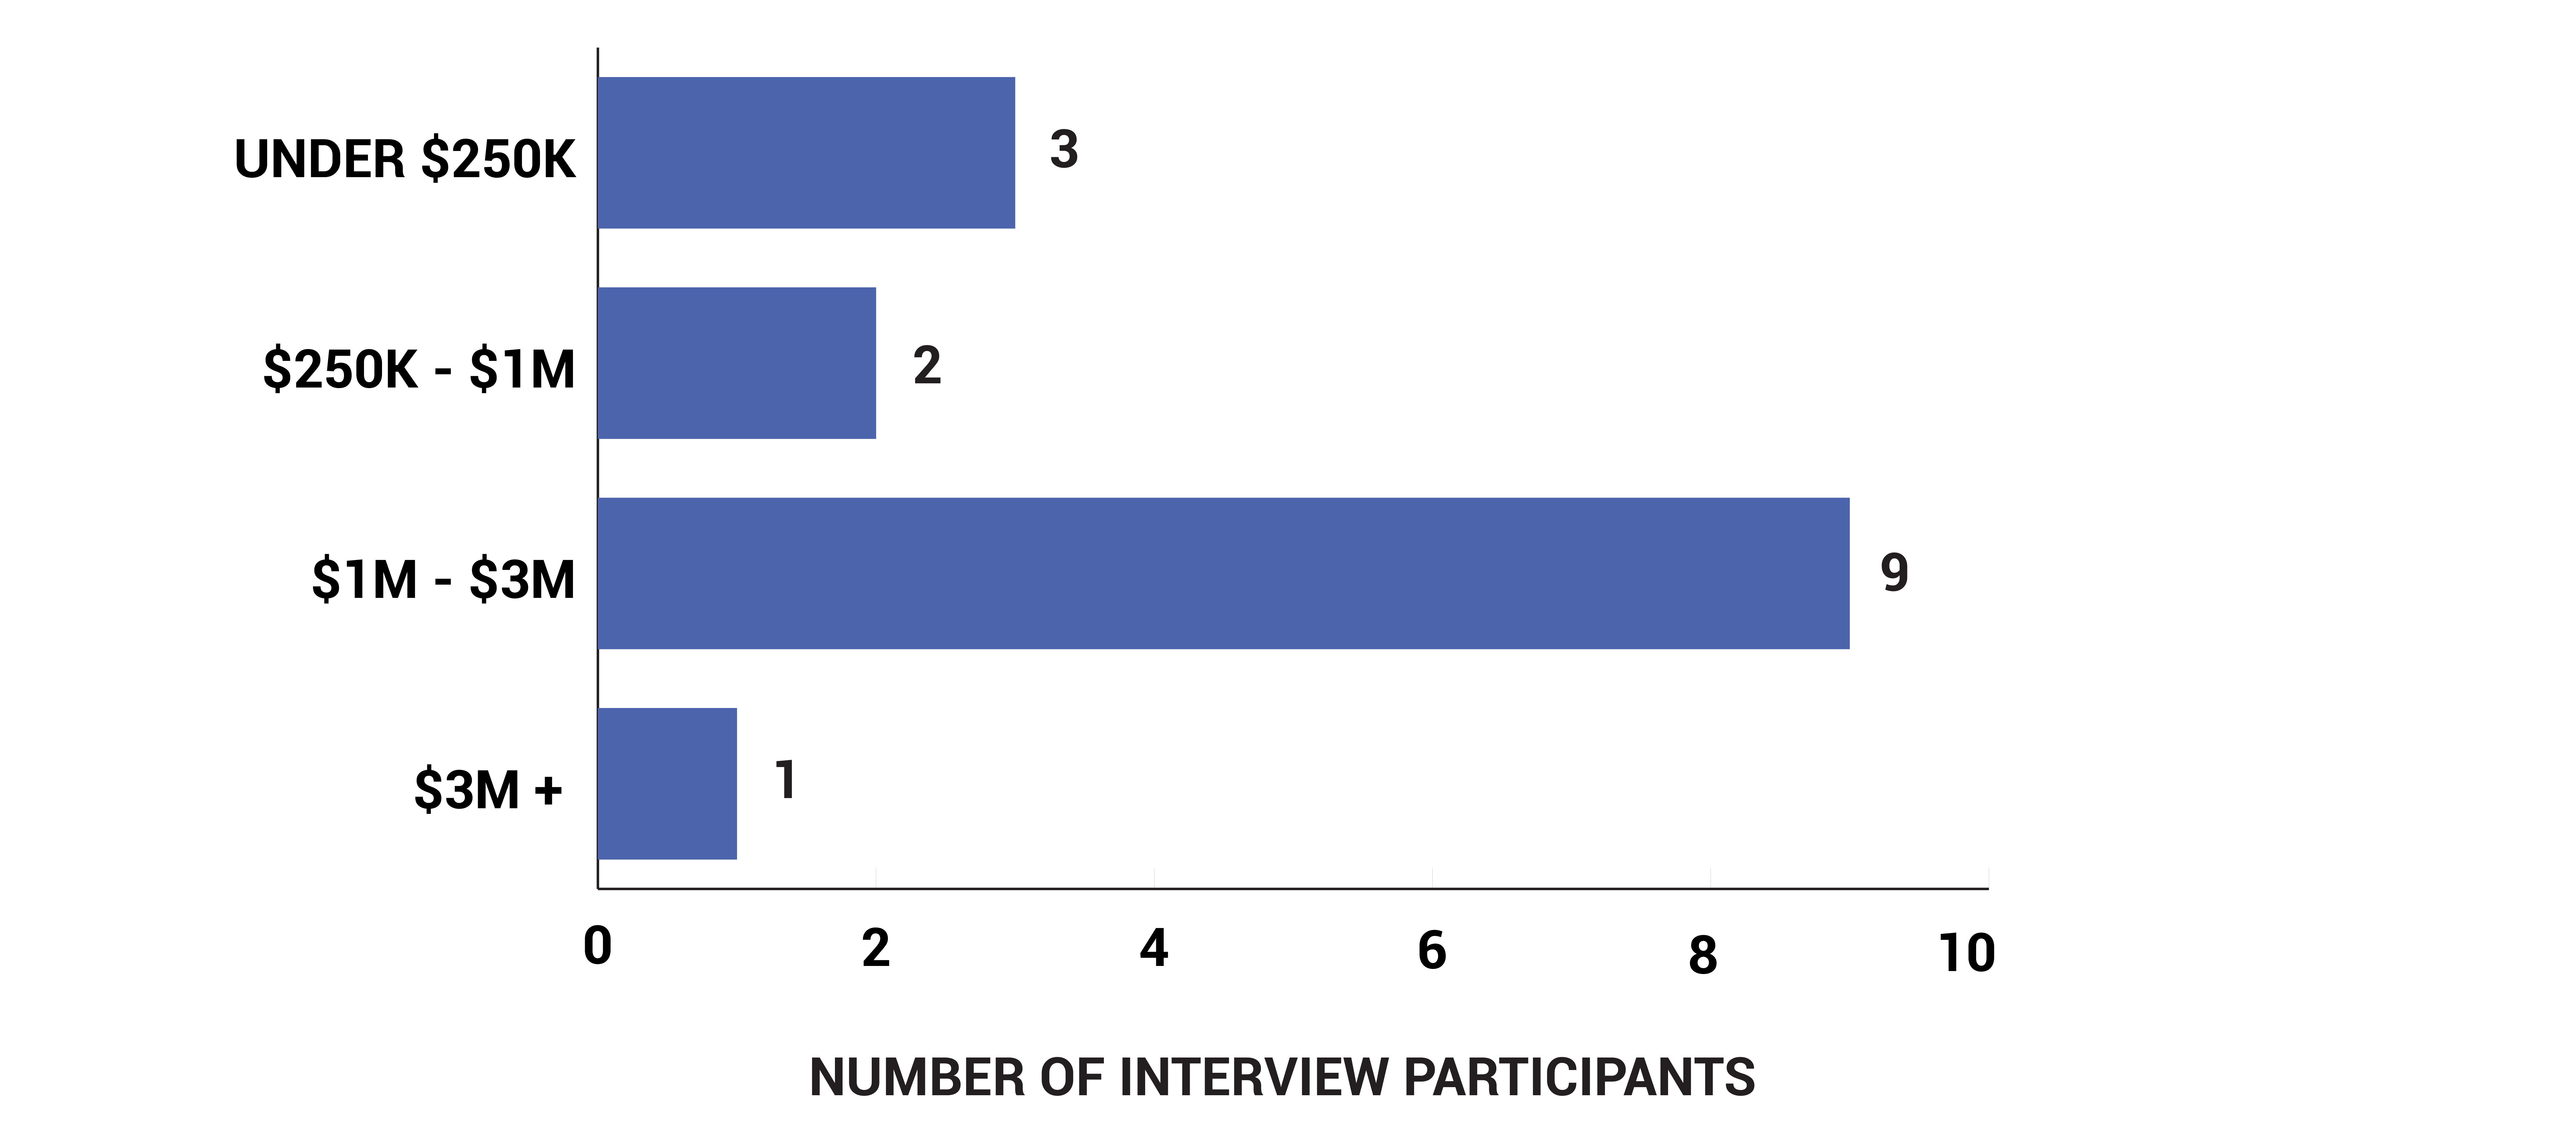 Figure 7 is a bar graph illustrating the number of interviewees by the amount of funding received from Luminate.